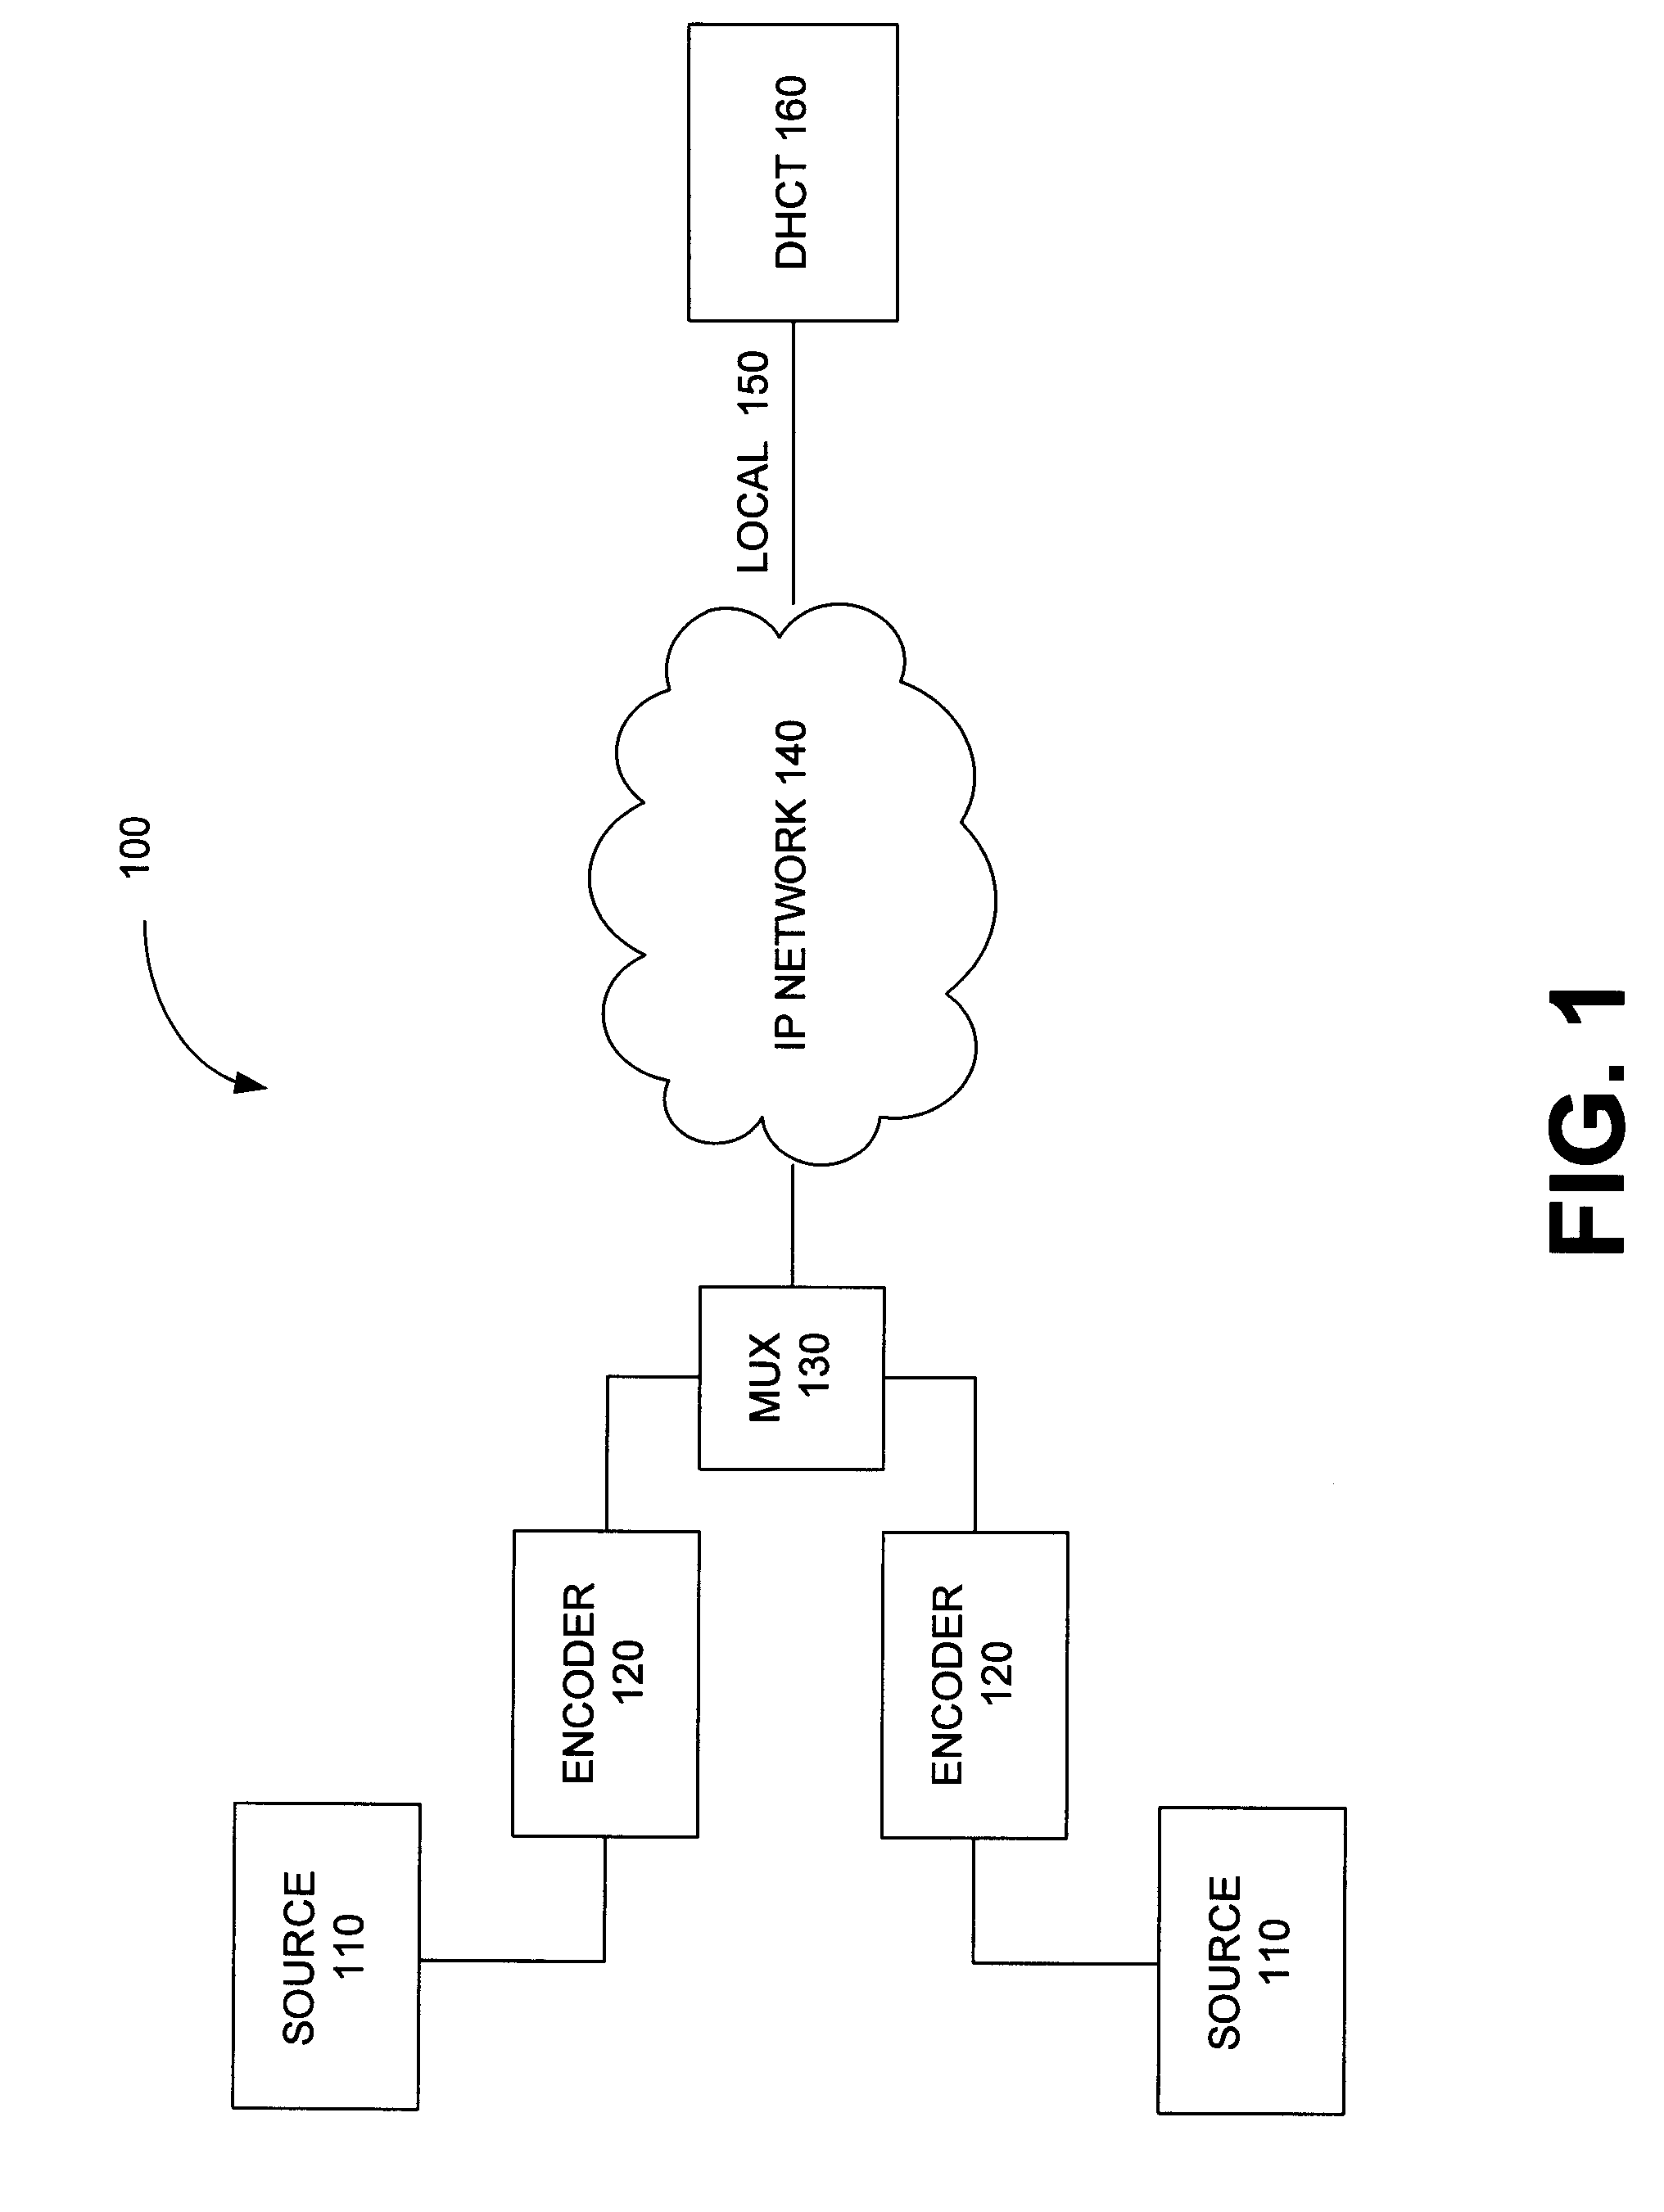 Systems and Methods of Assembling an Elementary Stream from an Encapsulated Multimedia Transport Stream